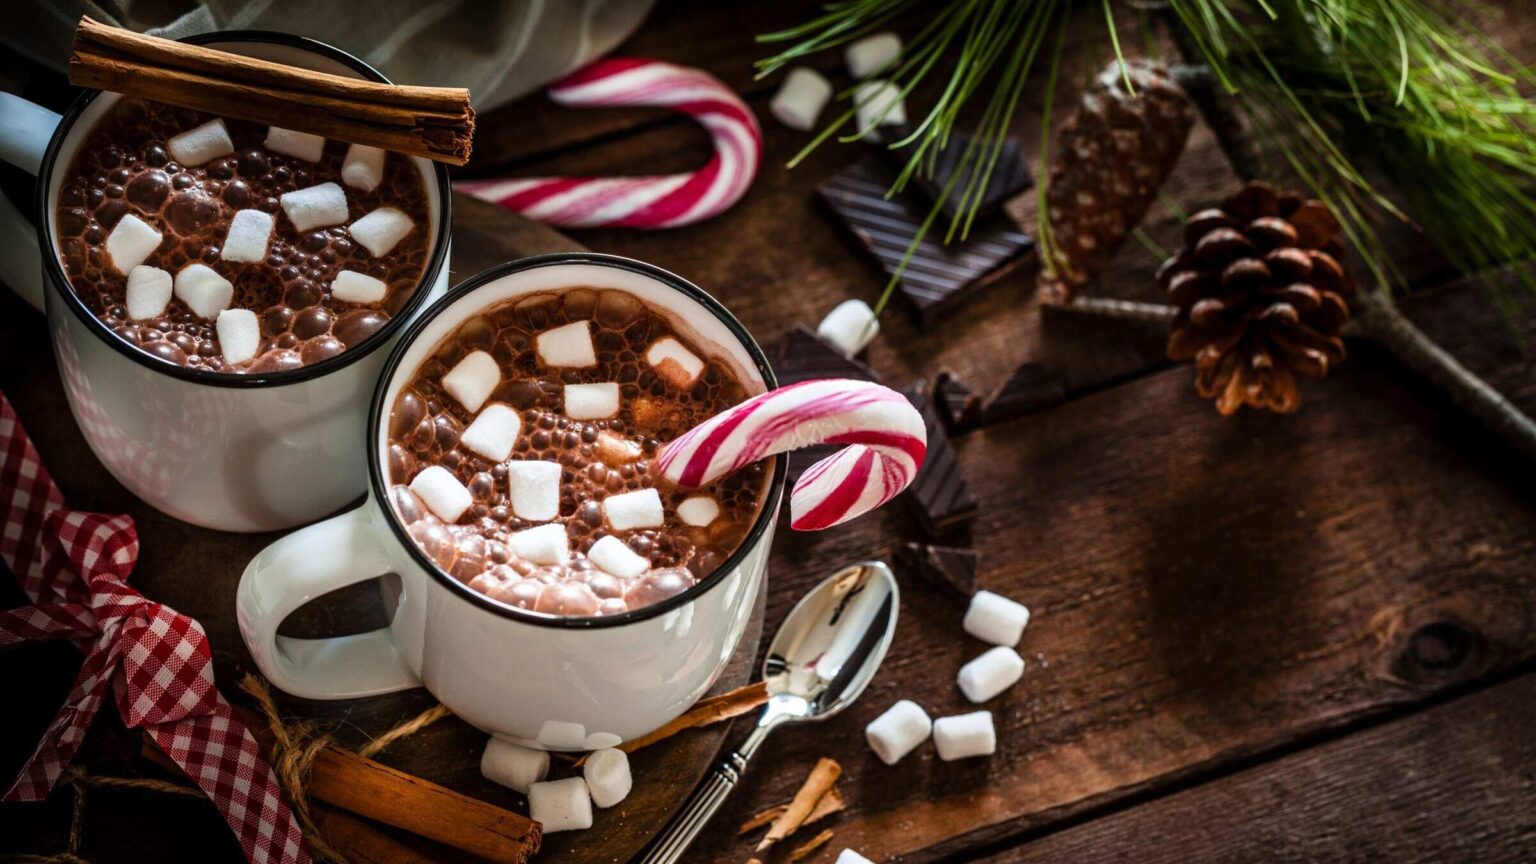 Need a cozy pick-me-up after facing winter's chill? These hot chocolate recipes put a unique twist on the traditional drink.